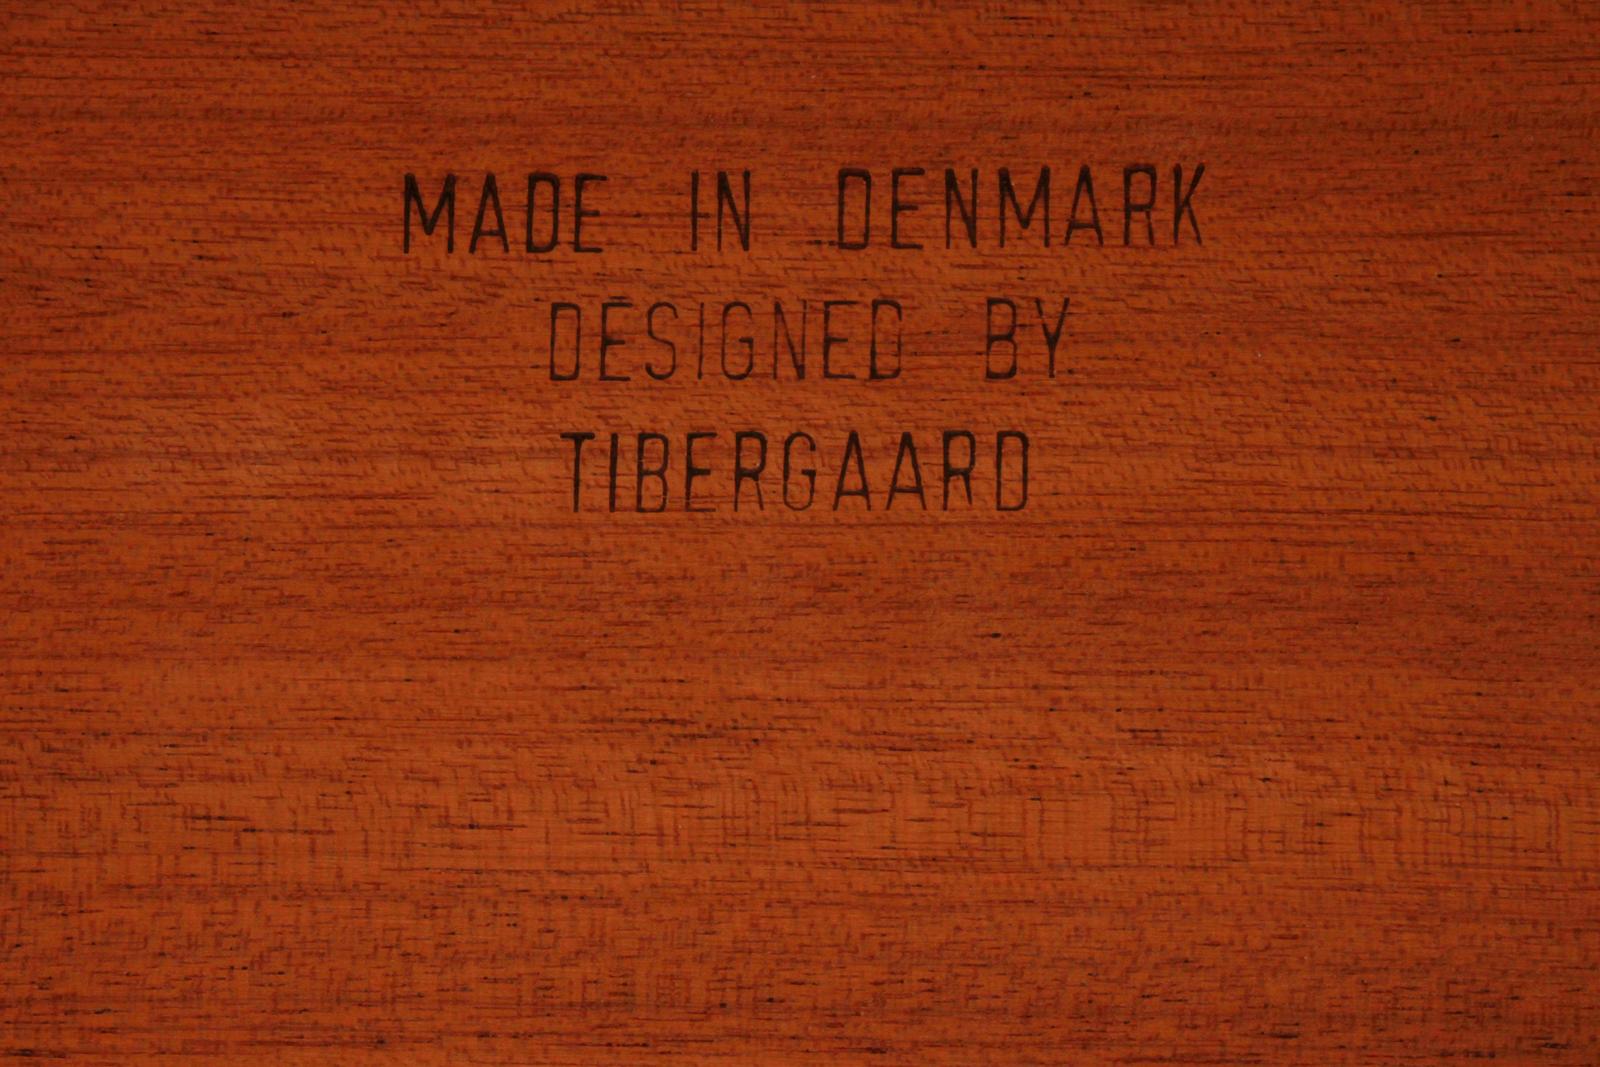 Teak desk and chair by Tibergaard, circa 1960
A good Danish teak desk designed by Tibergaard in the 1960s, with four drawers this desk is in very good condition throughout, this comes with a matching chair as in photos, unsure of maker but good